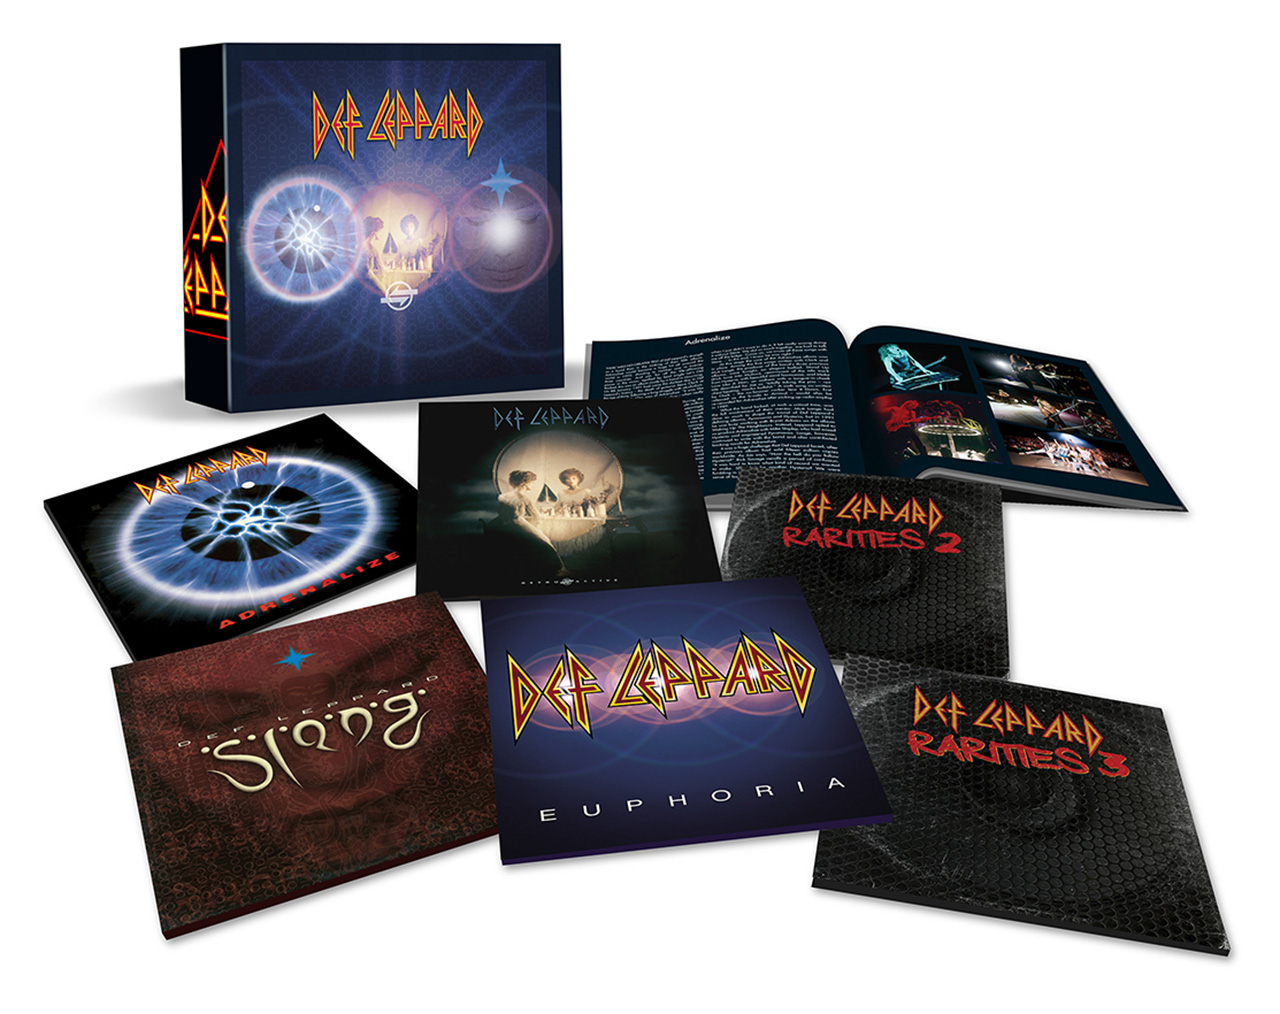 Def Leppard detail part two of their careerspanning box